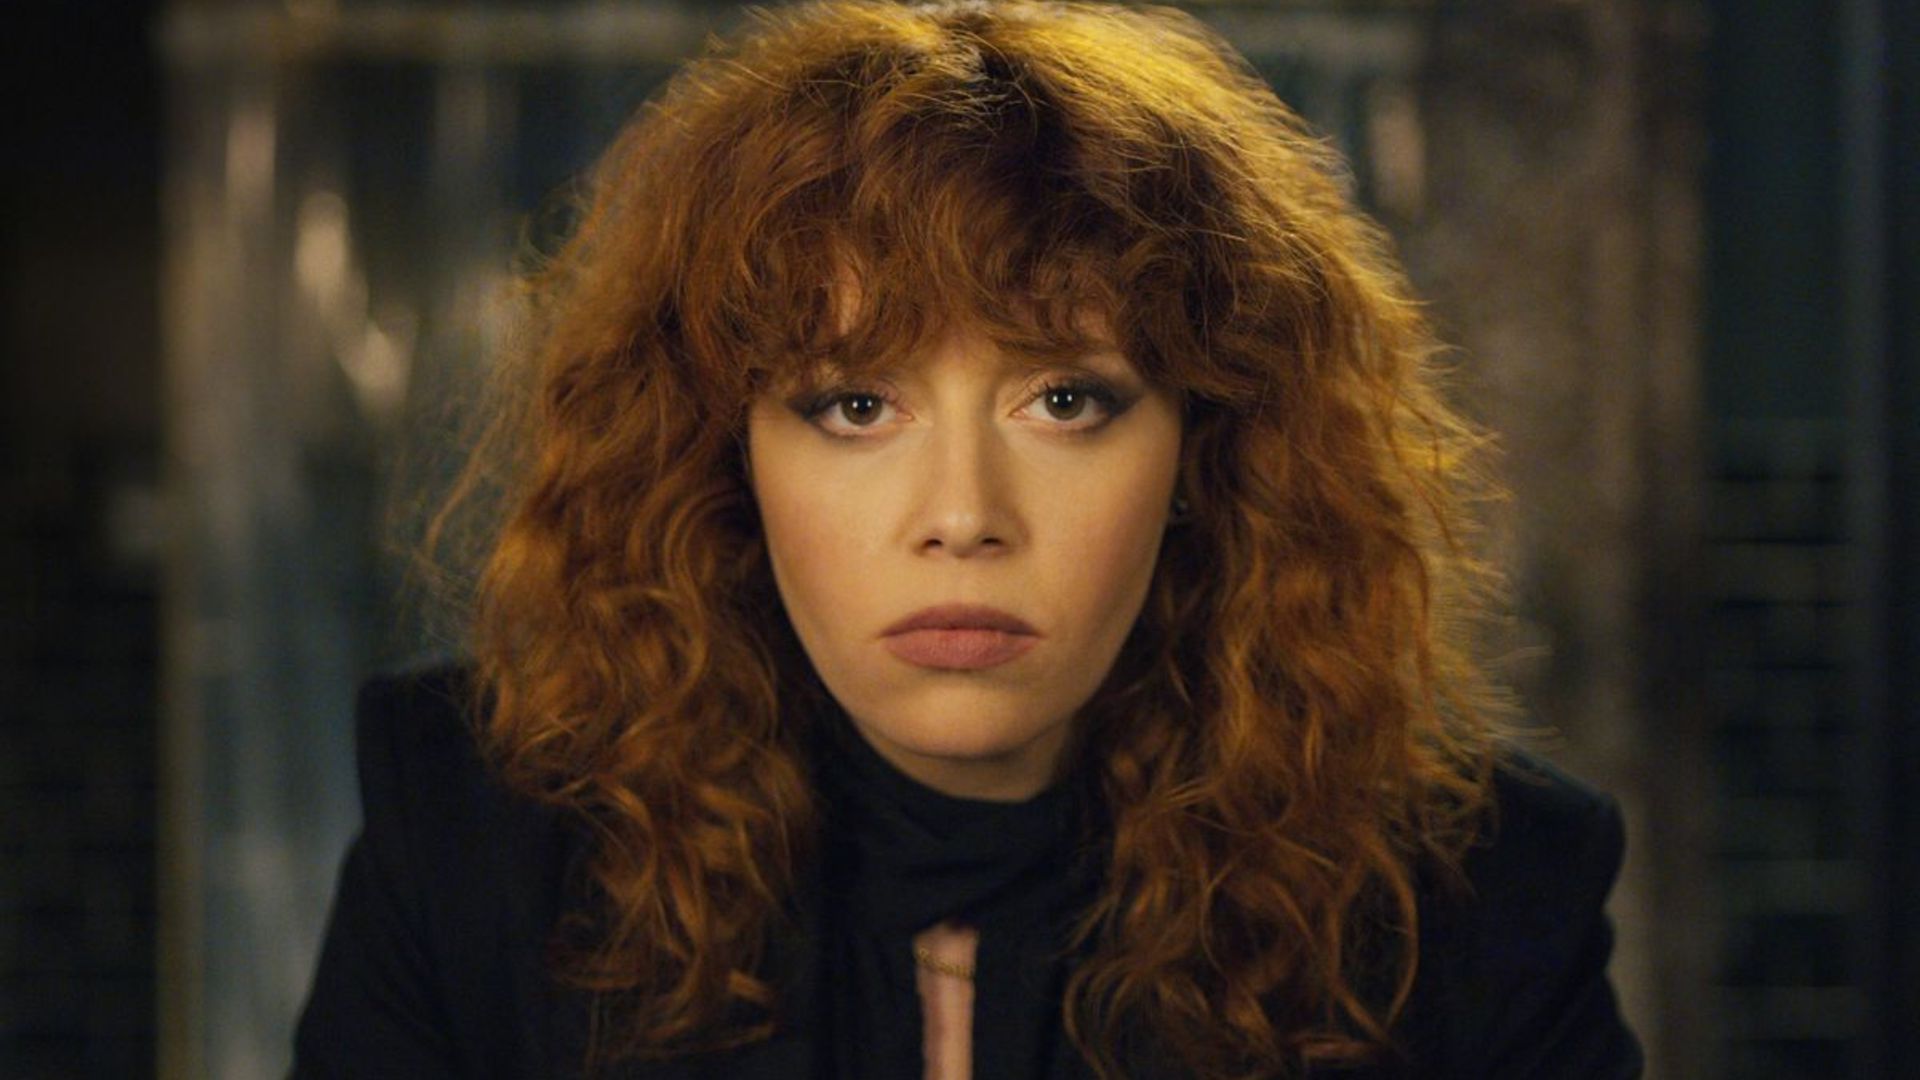 Russian Doll - one of the best Netflix shows